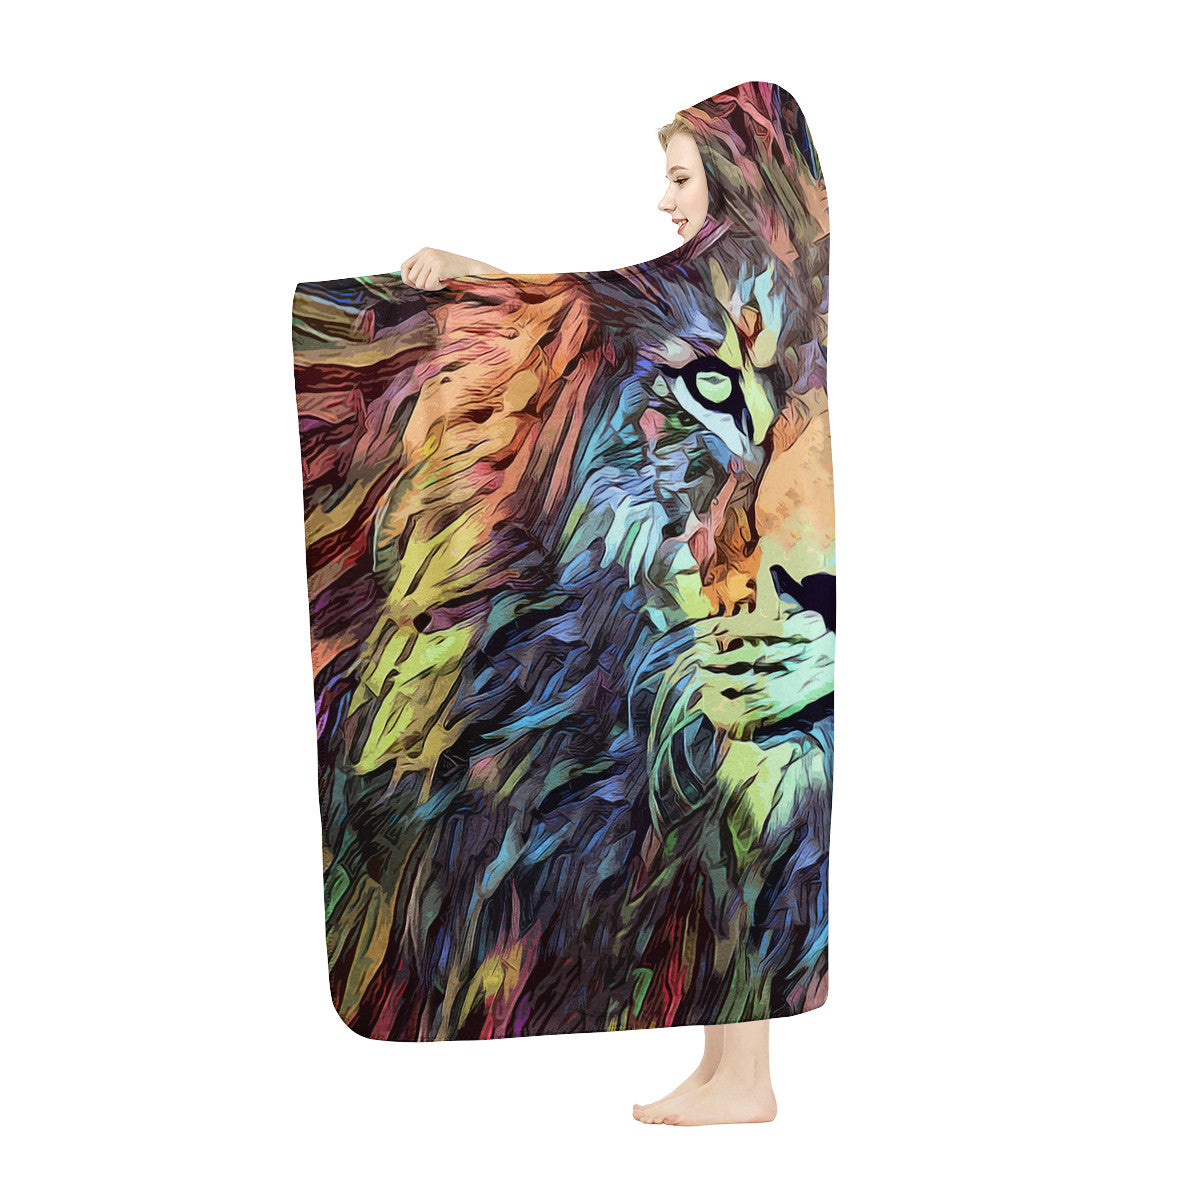 Painted Lion King Of The Jungle Hooded Blanket - Mind Gone